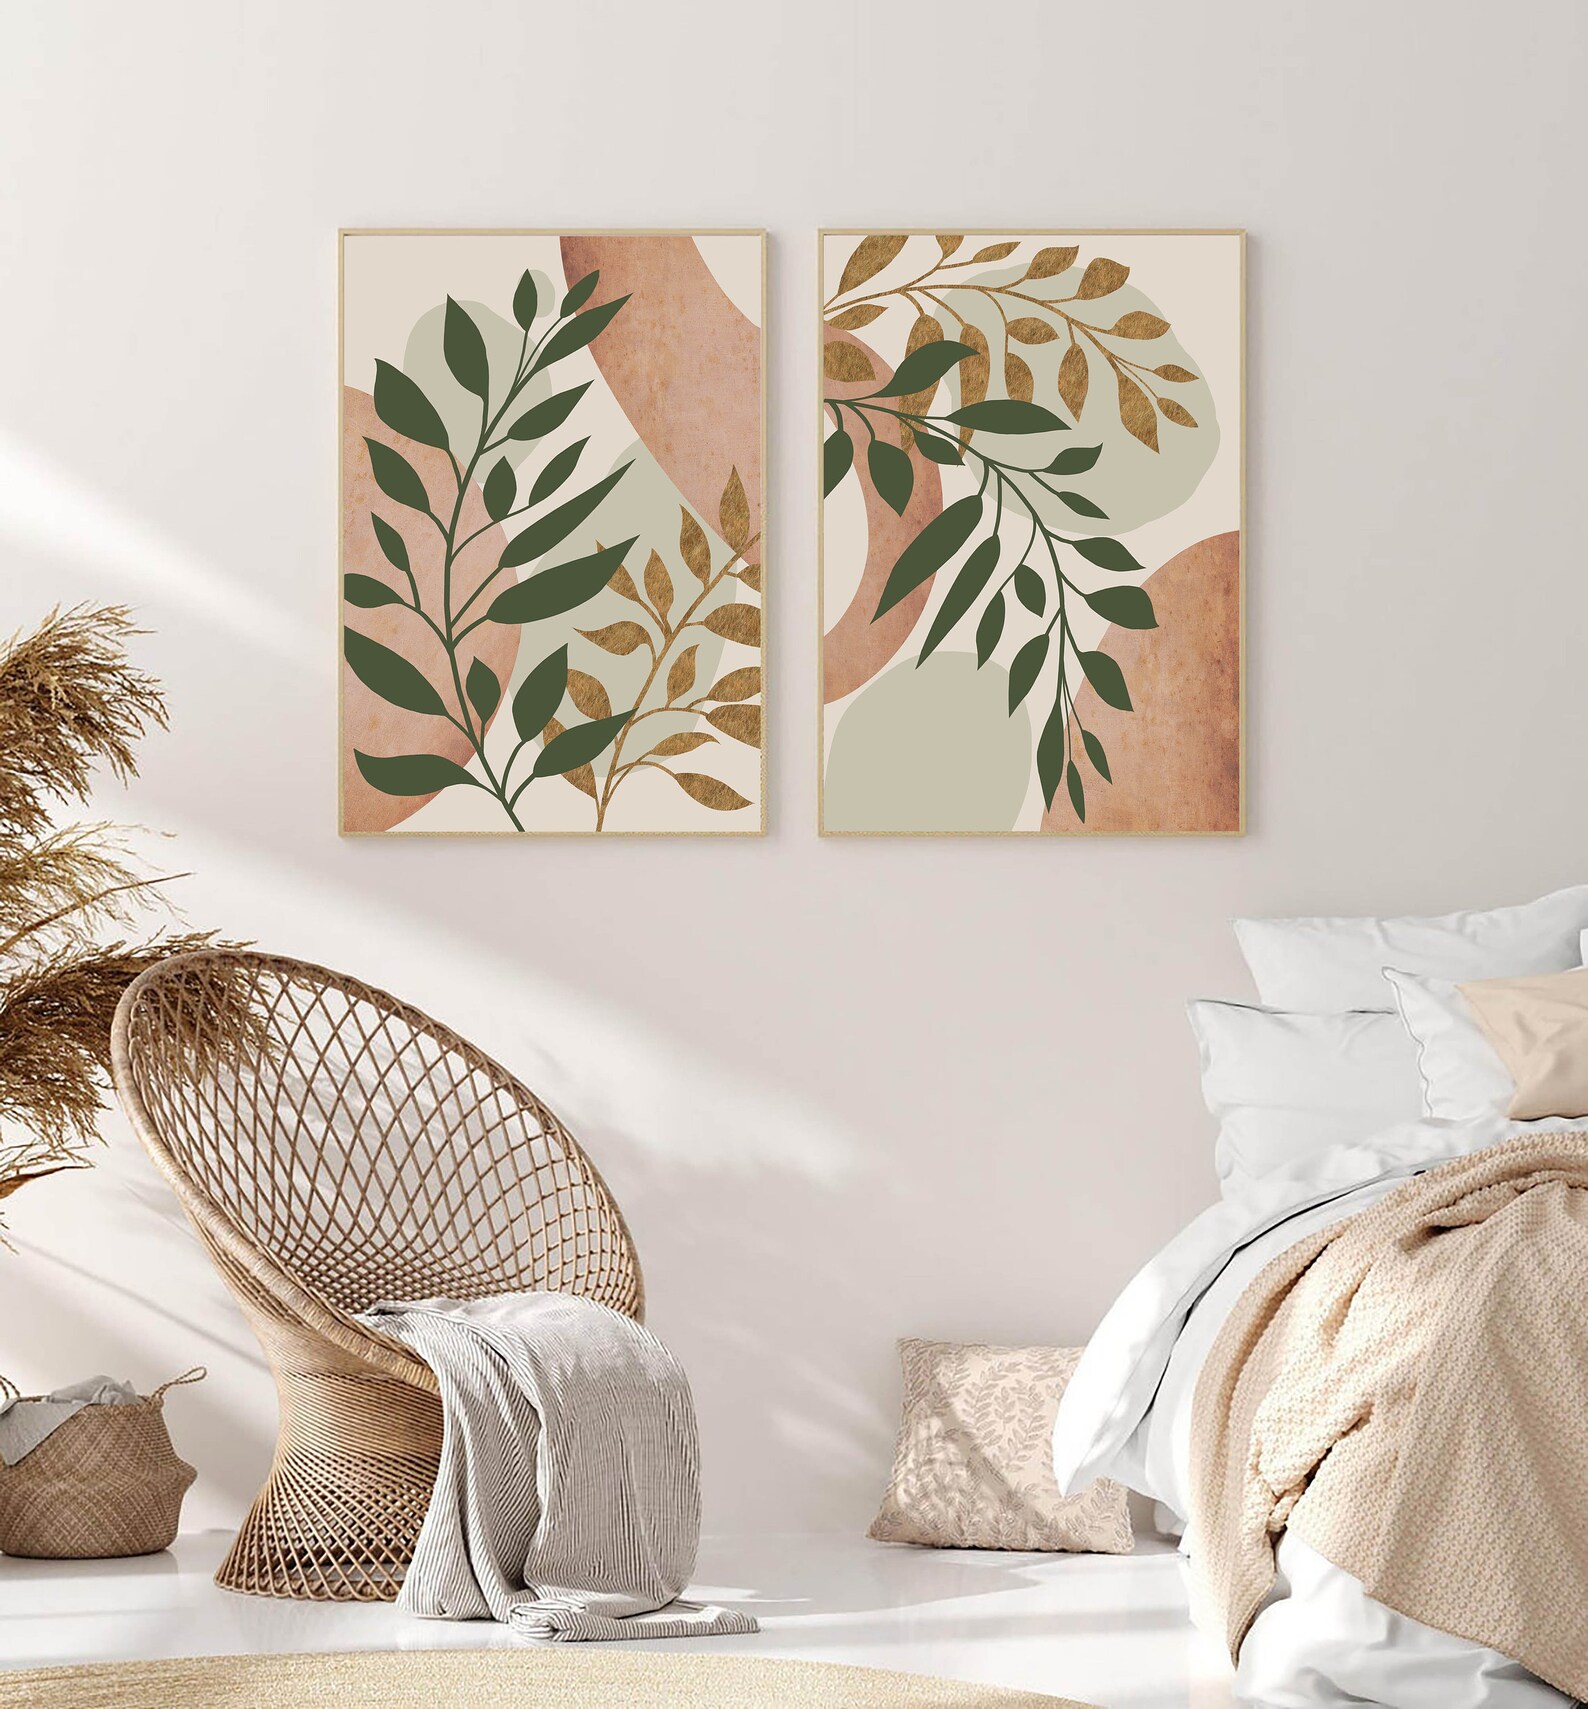 Boho wall art set of 2. Graphic plants on an abstract | Etsy